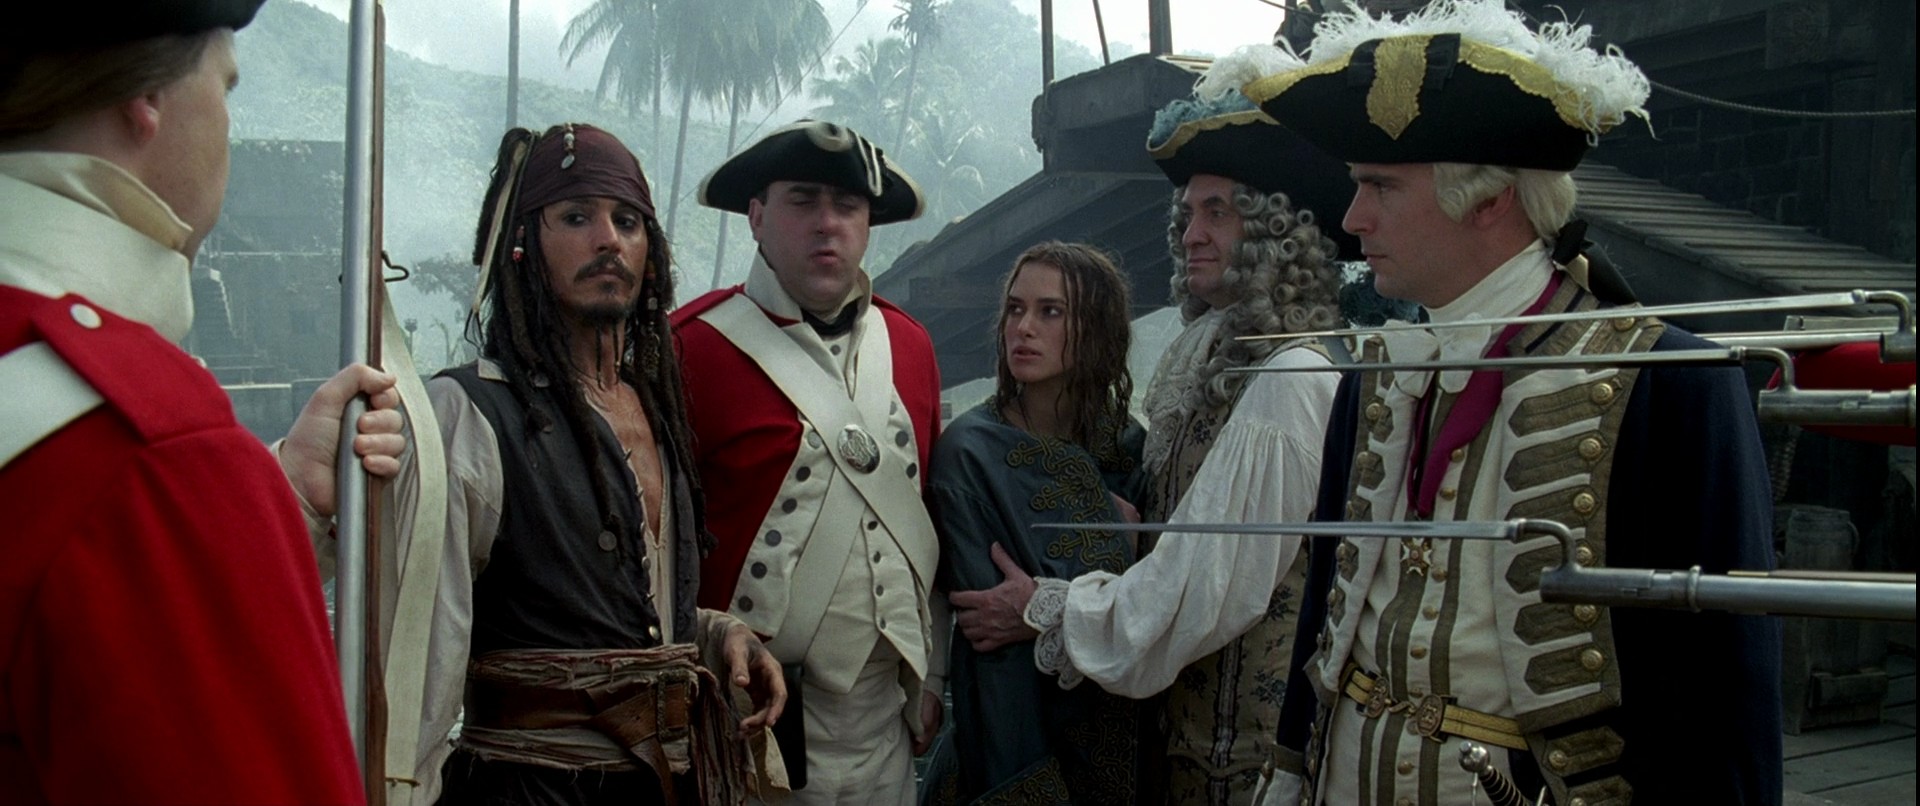 pirates of the caribbean cast